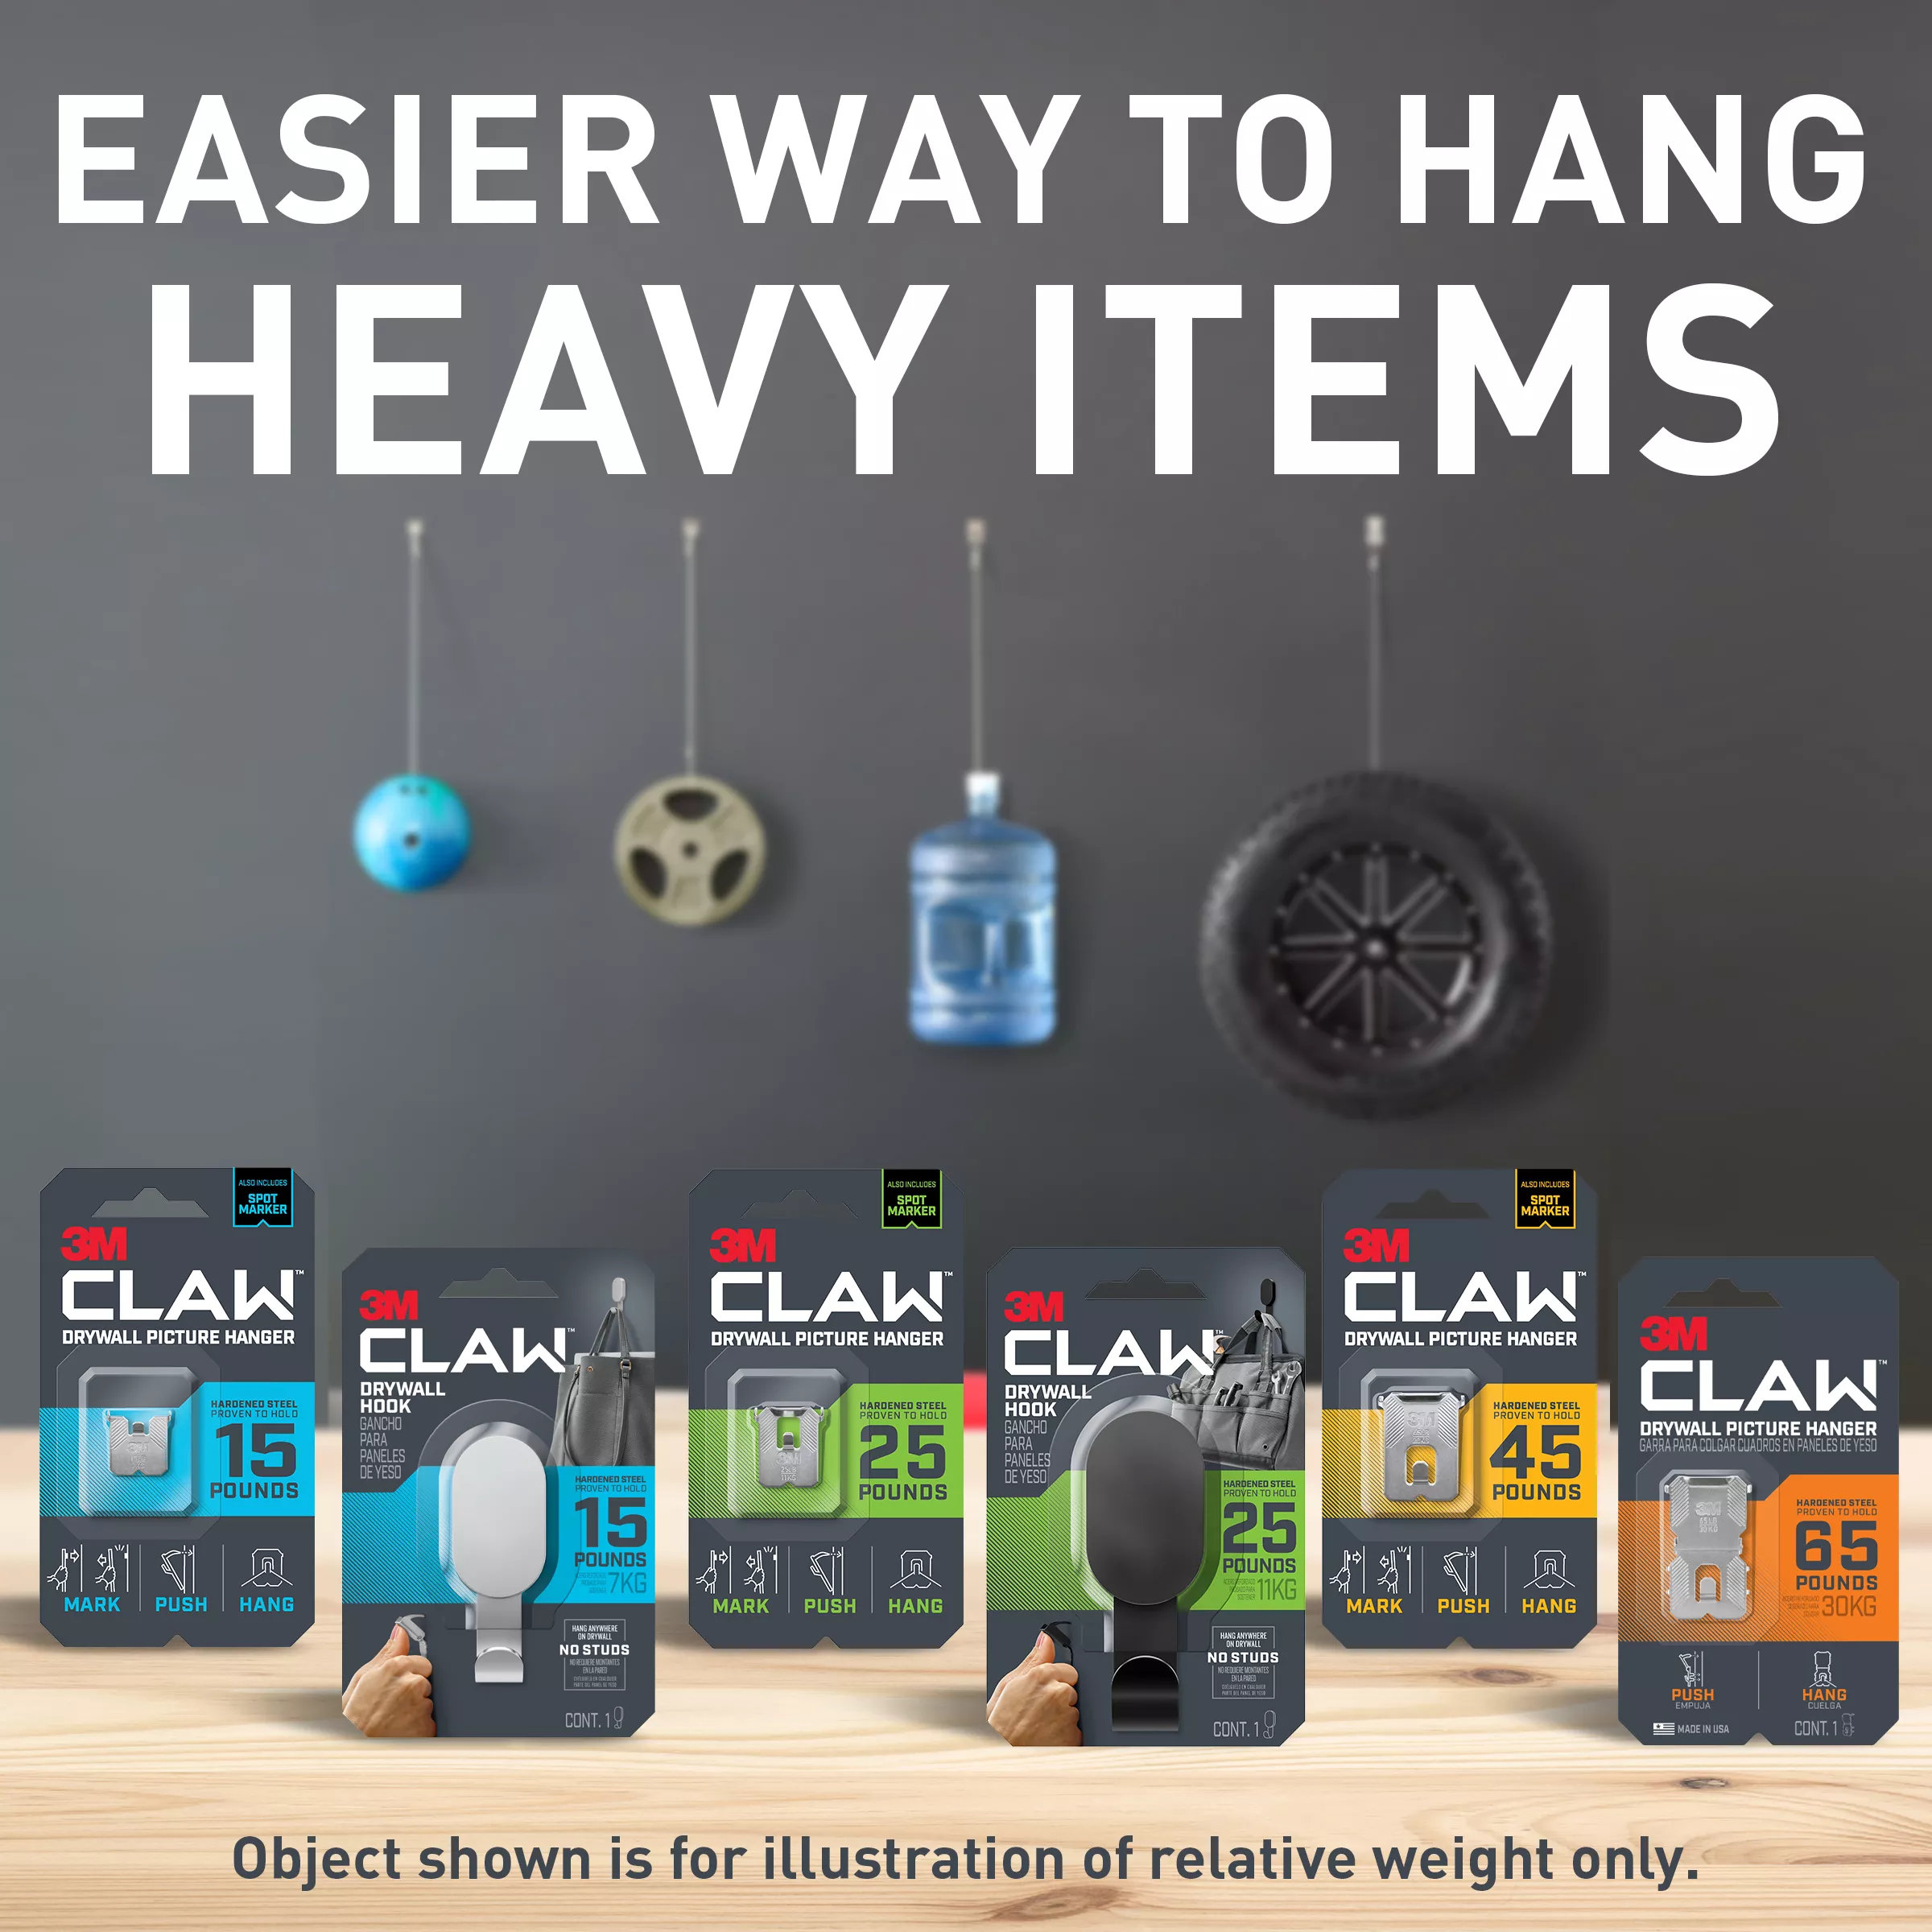 SKU 7100274758 | 3M CLAW™ Drywall Picture Hangers 25lb with Temporary Spot Markers 3PH25M-10ES